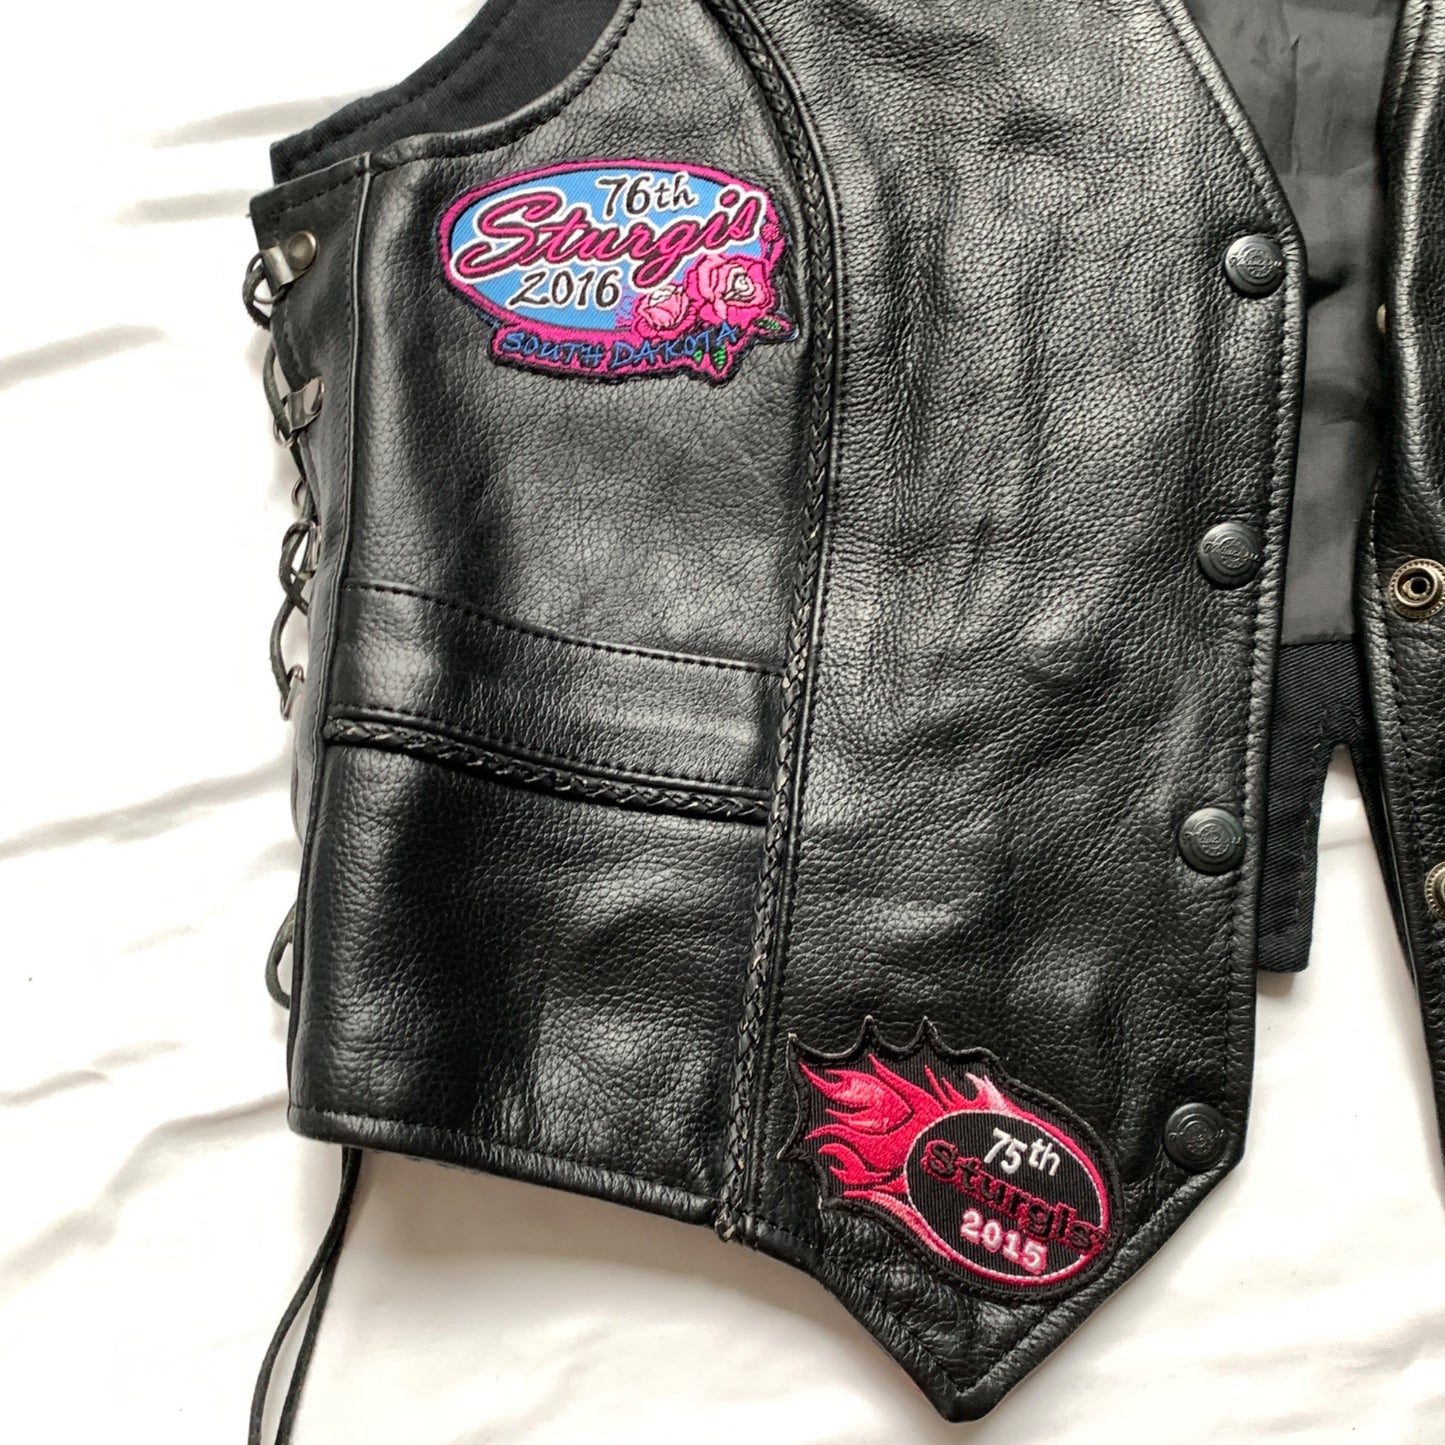 Milwaukee Women's Black Leather Motorcycle Vest XL Patches